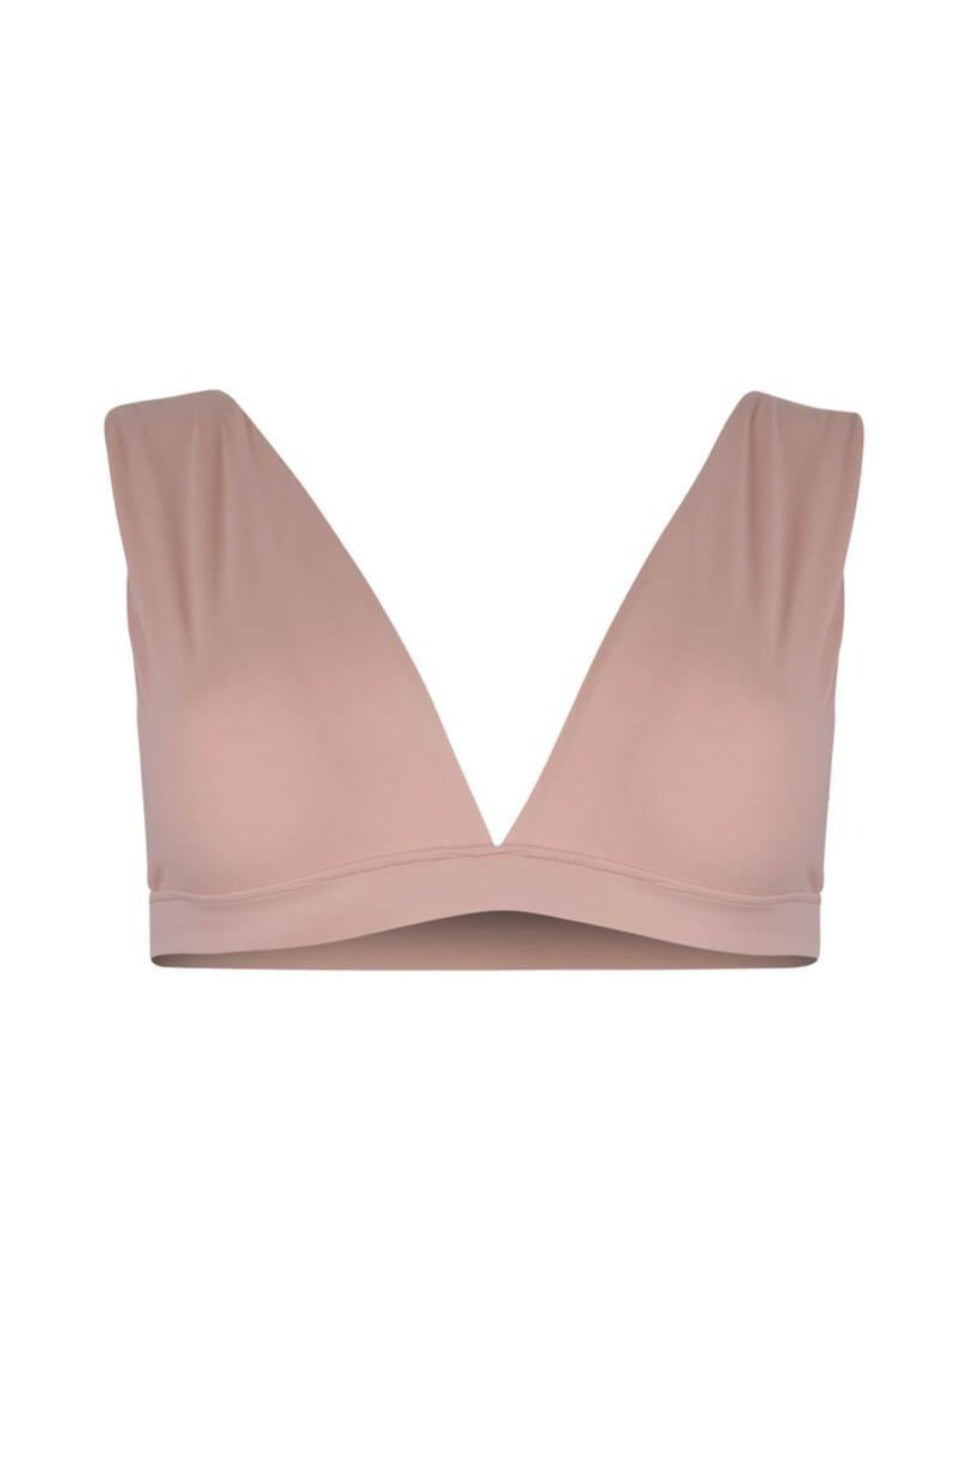 The Natalie bikini top for large busts in blush color